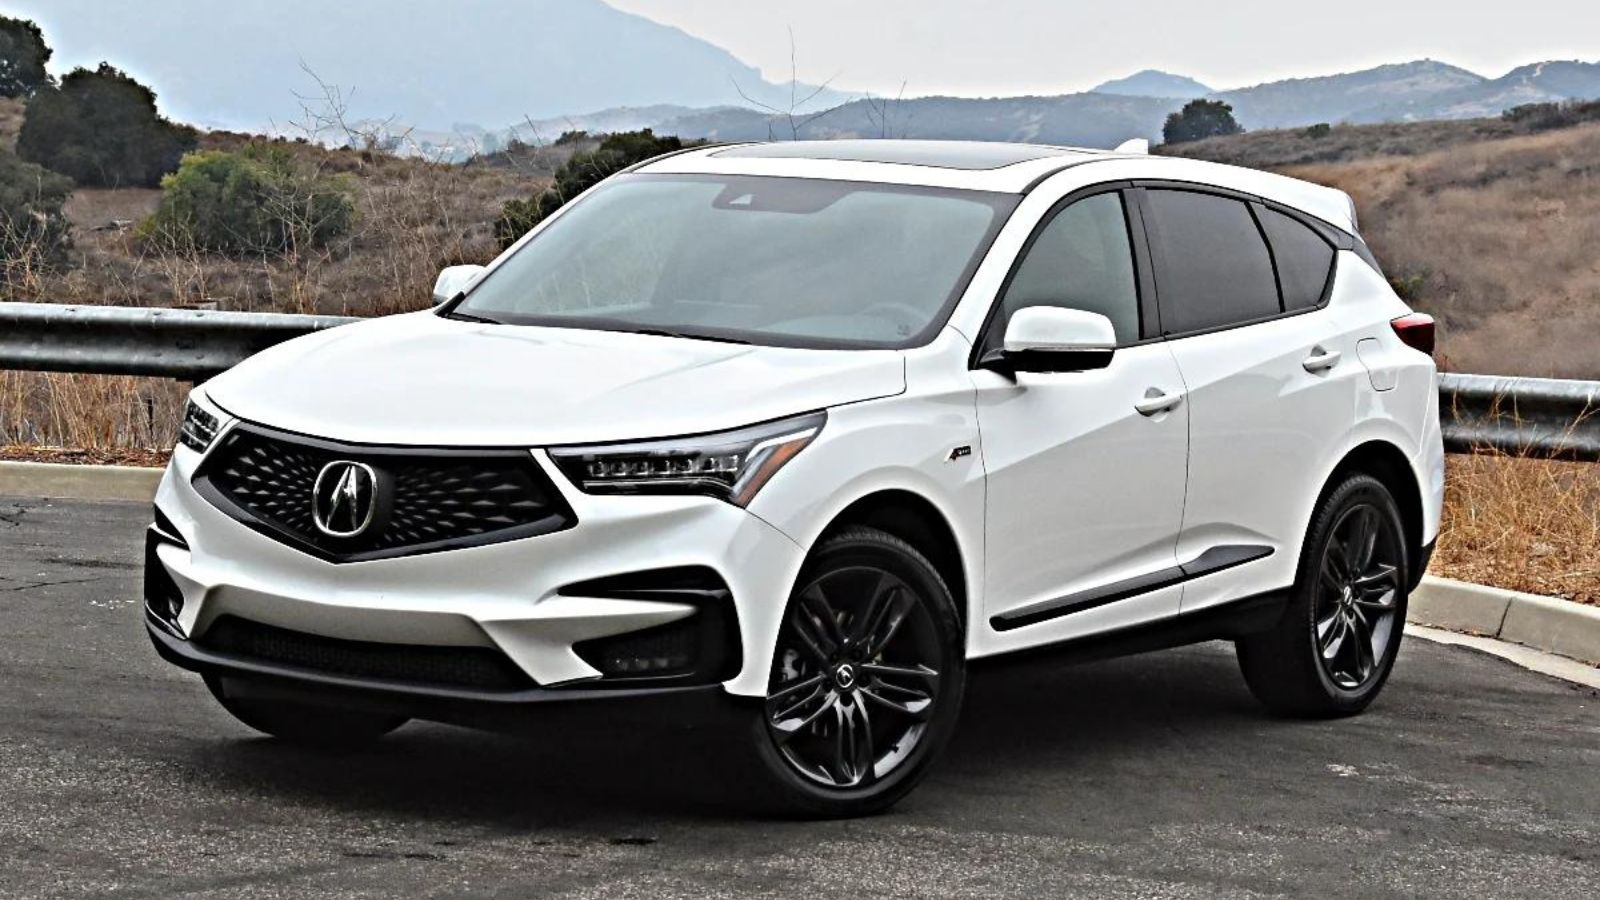 Acura RDX Lug Nut Torque Specs: DIY Guide & Safety Tips (in article)